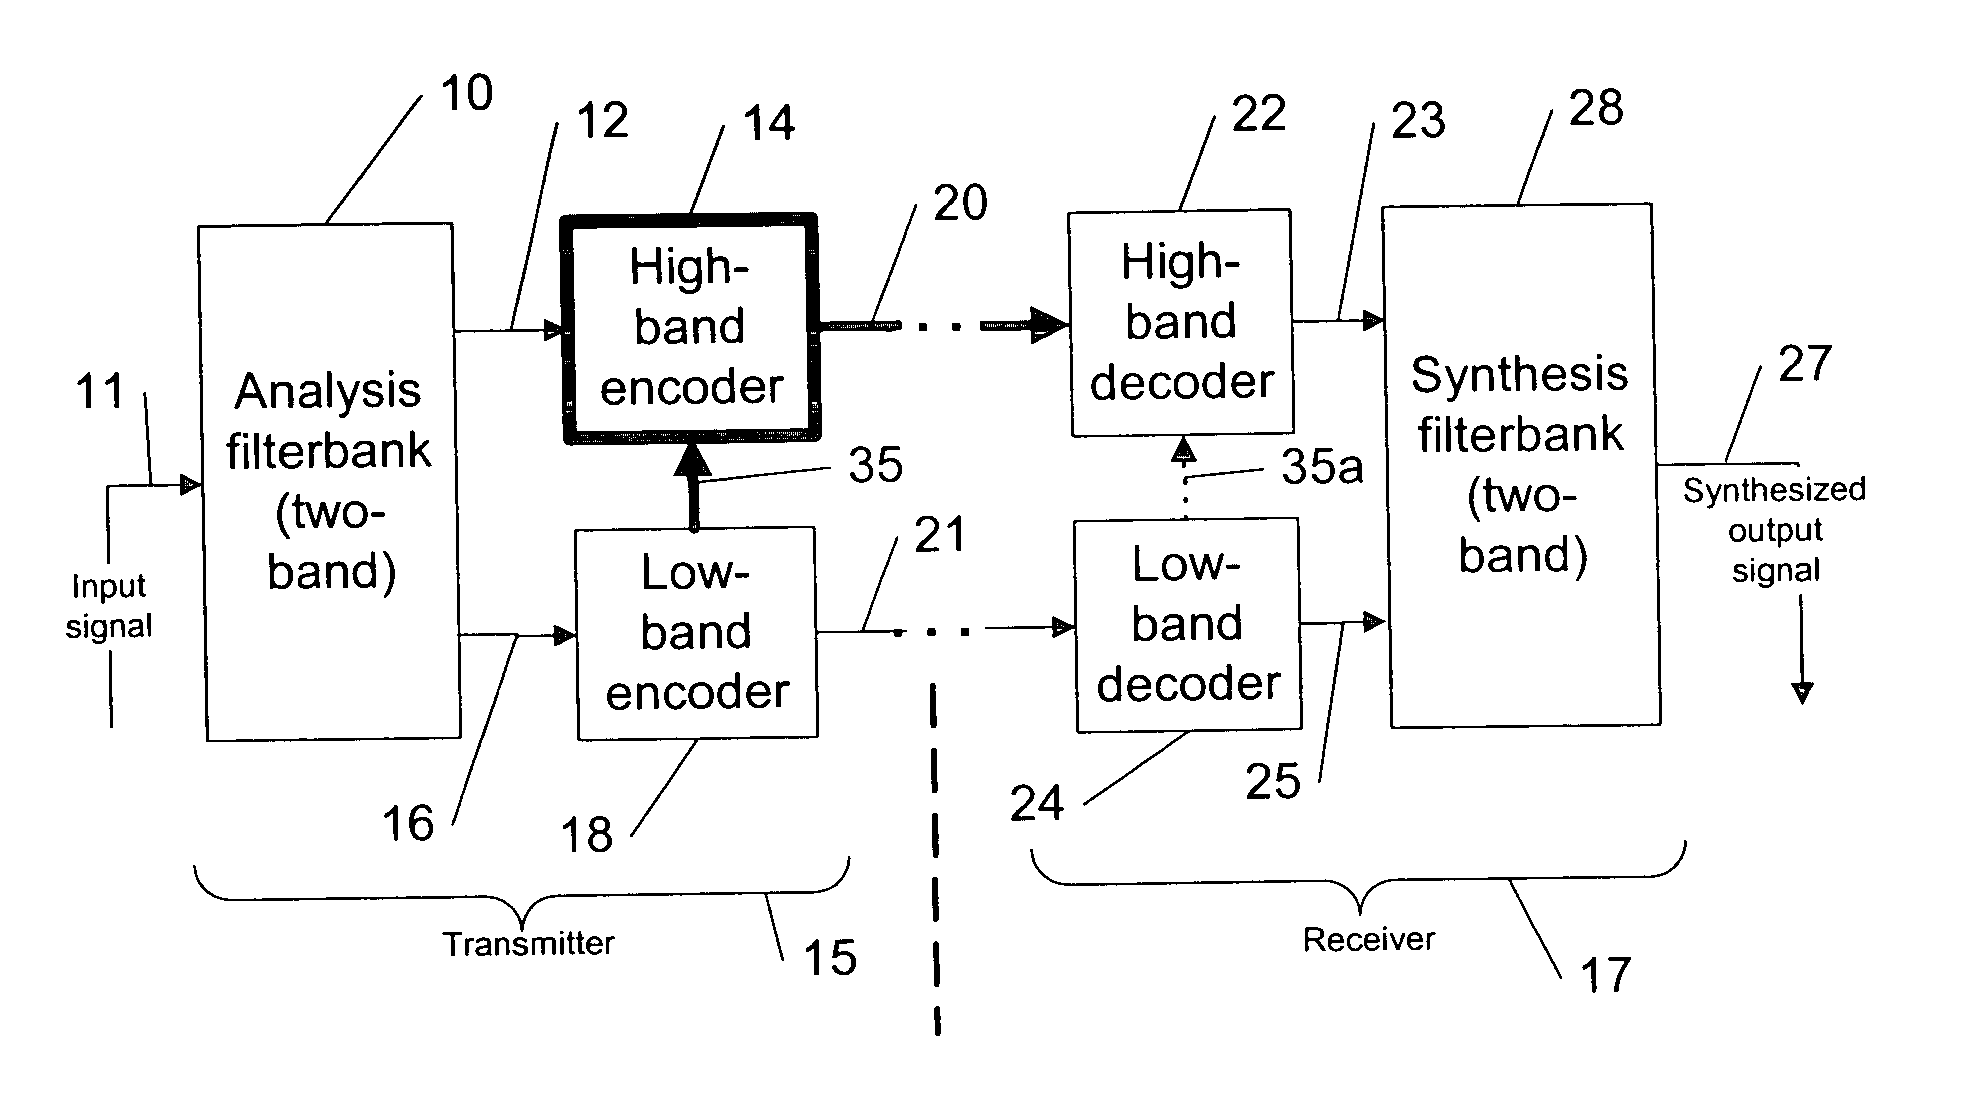 Signal adaptation for higher band coding in a codec utilizing band split coding